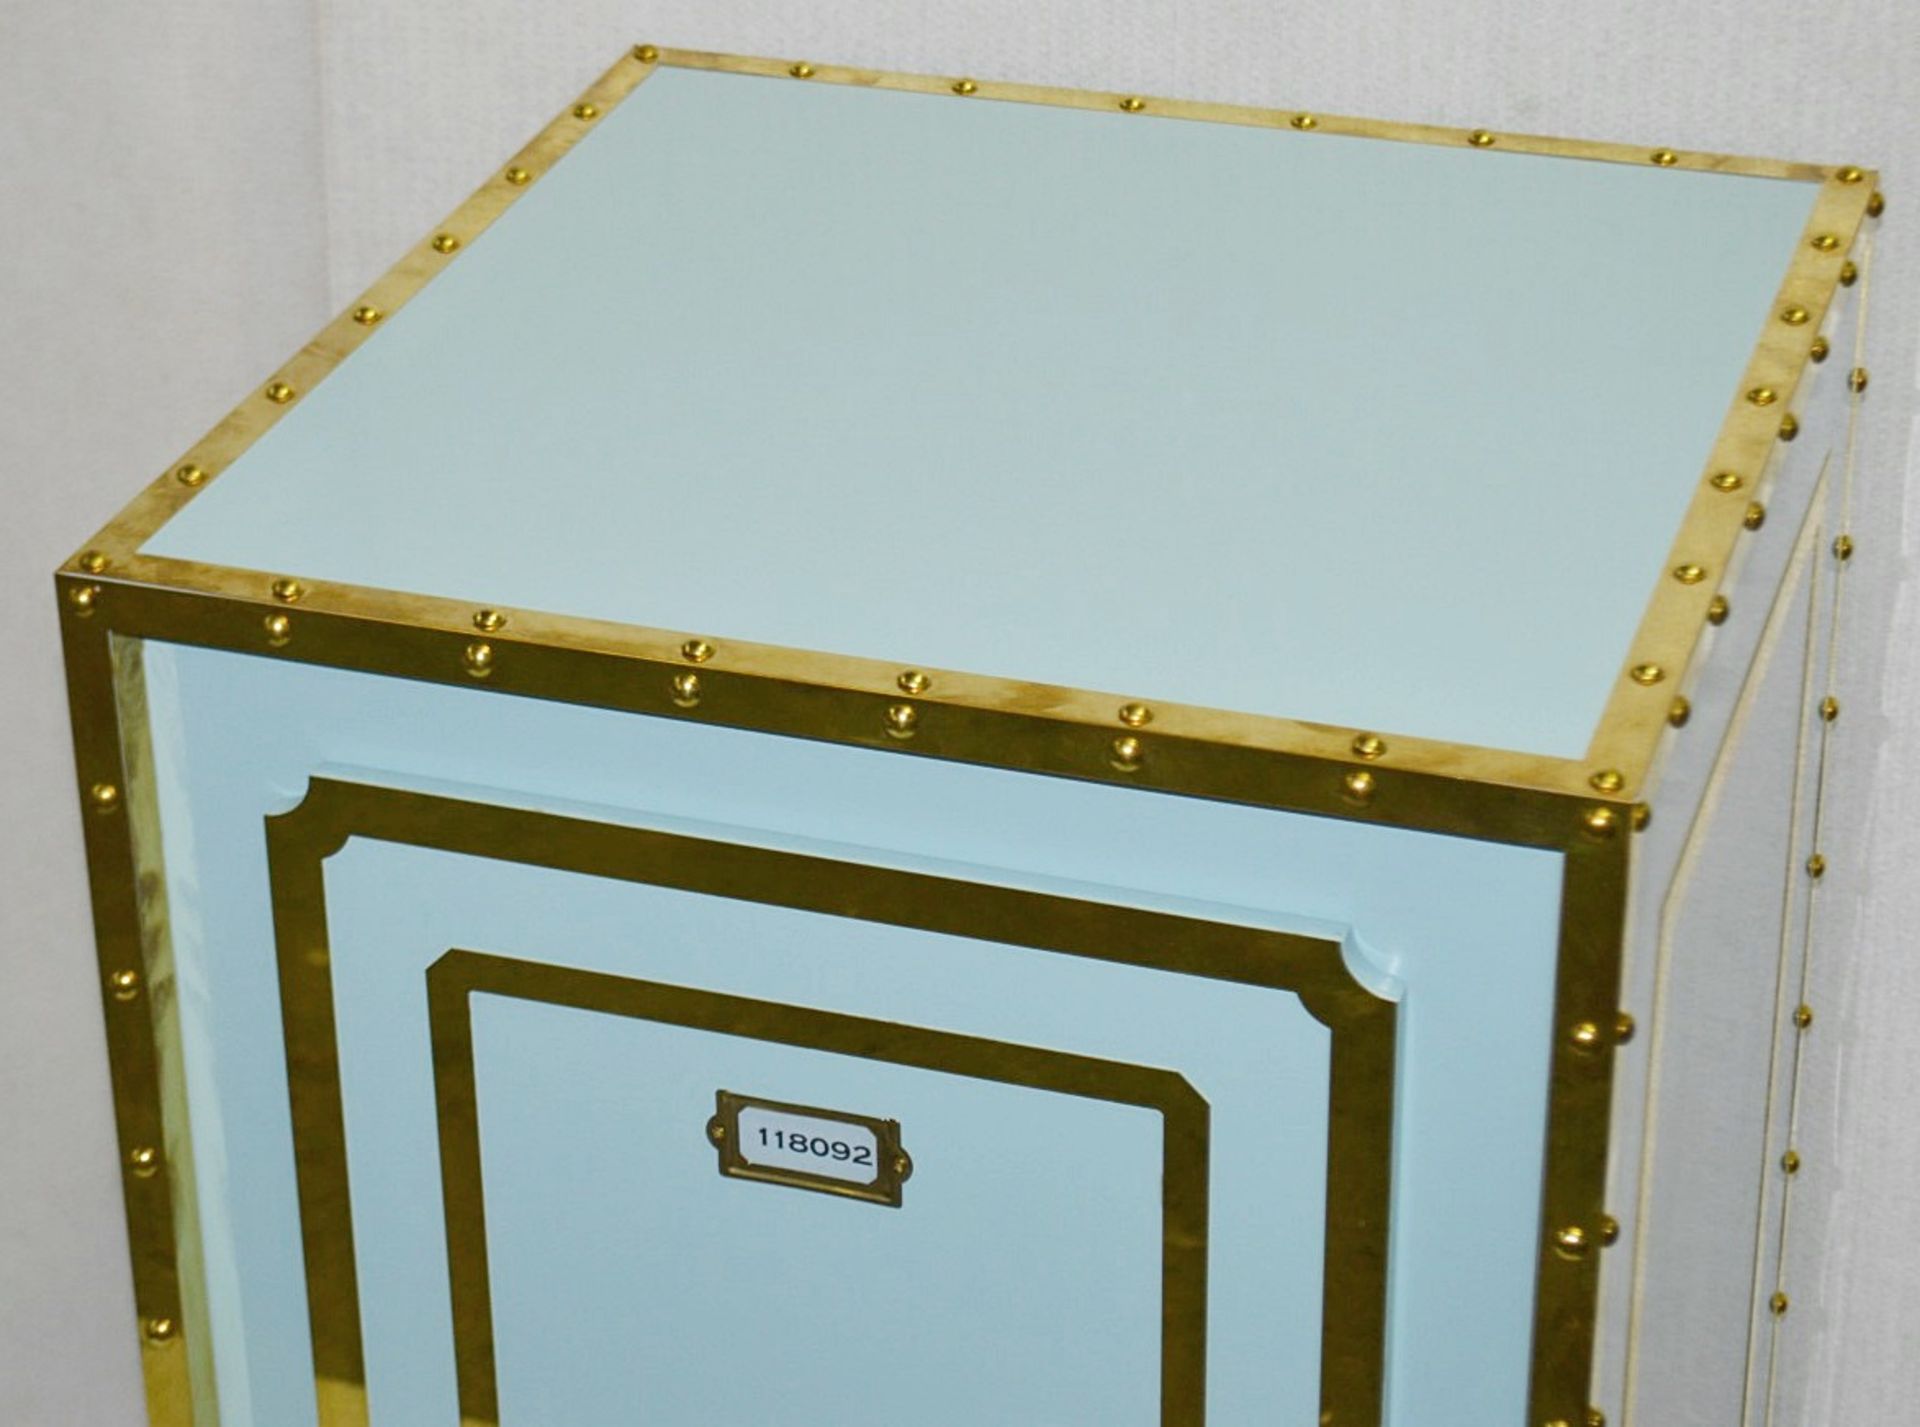 1 x Opulent Bank Vault Safe-style Shop Display Plinth In Tiffany Blue With Gold Trim - Image 4 of 6